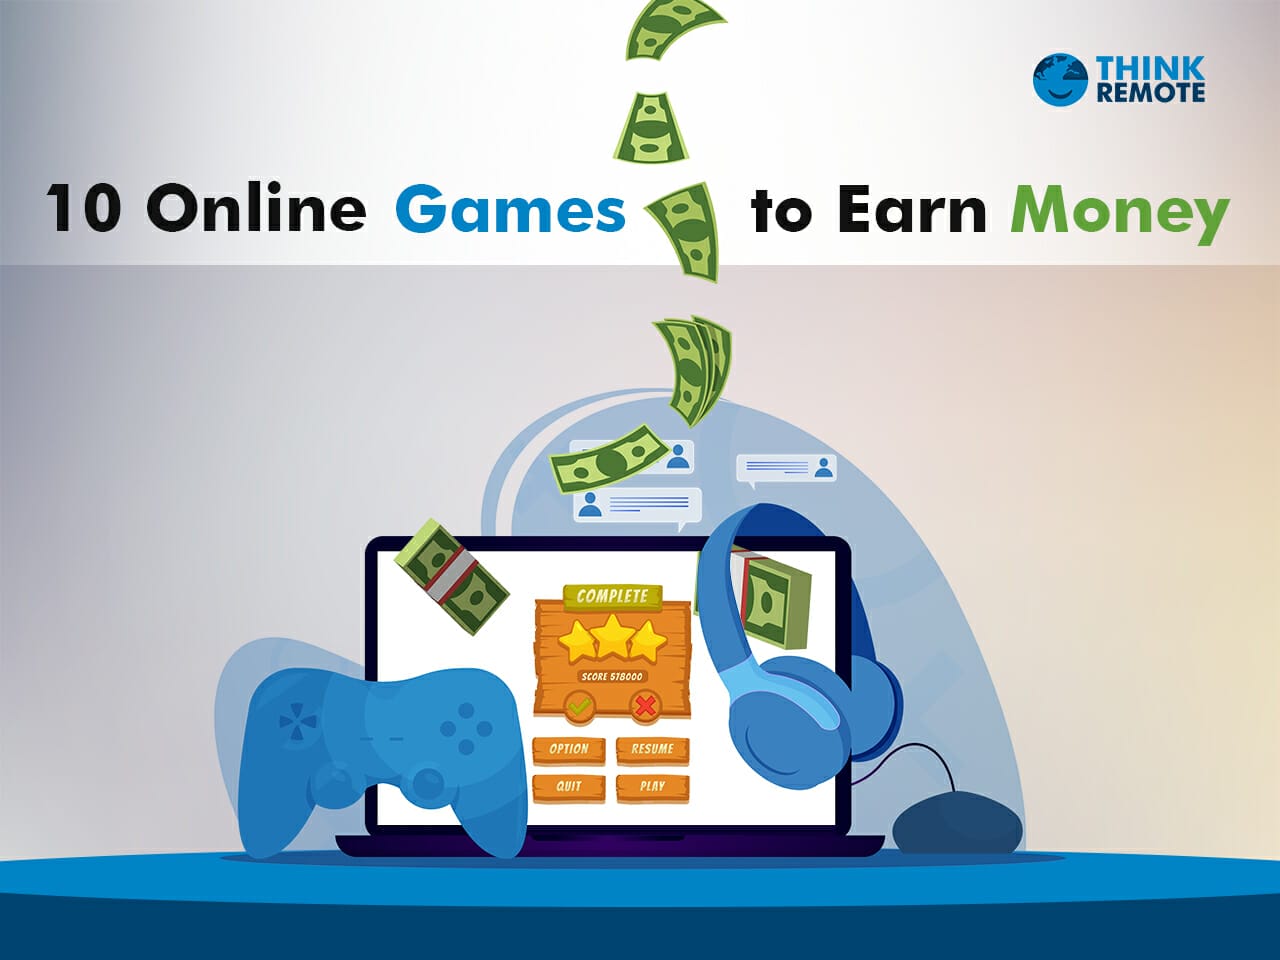 Can Online games make you a serious income..?